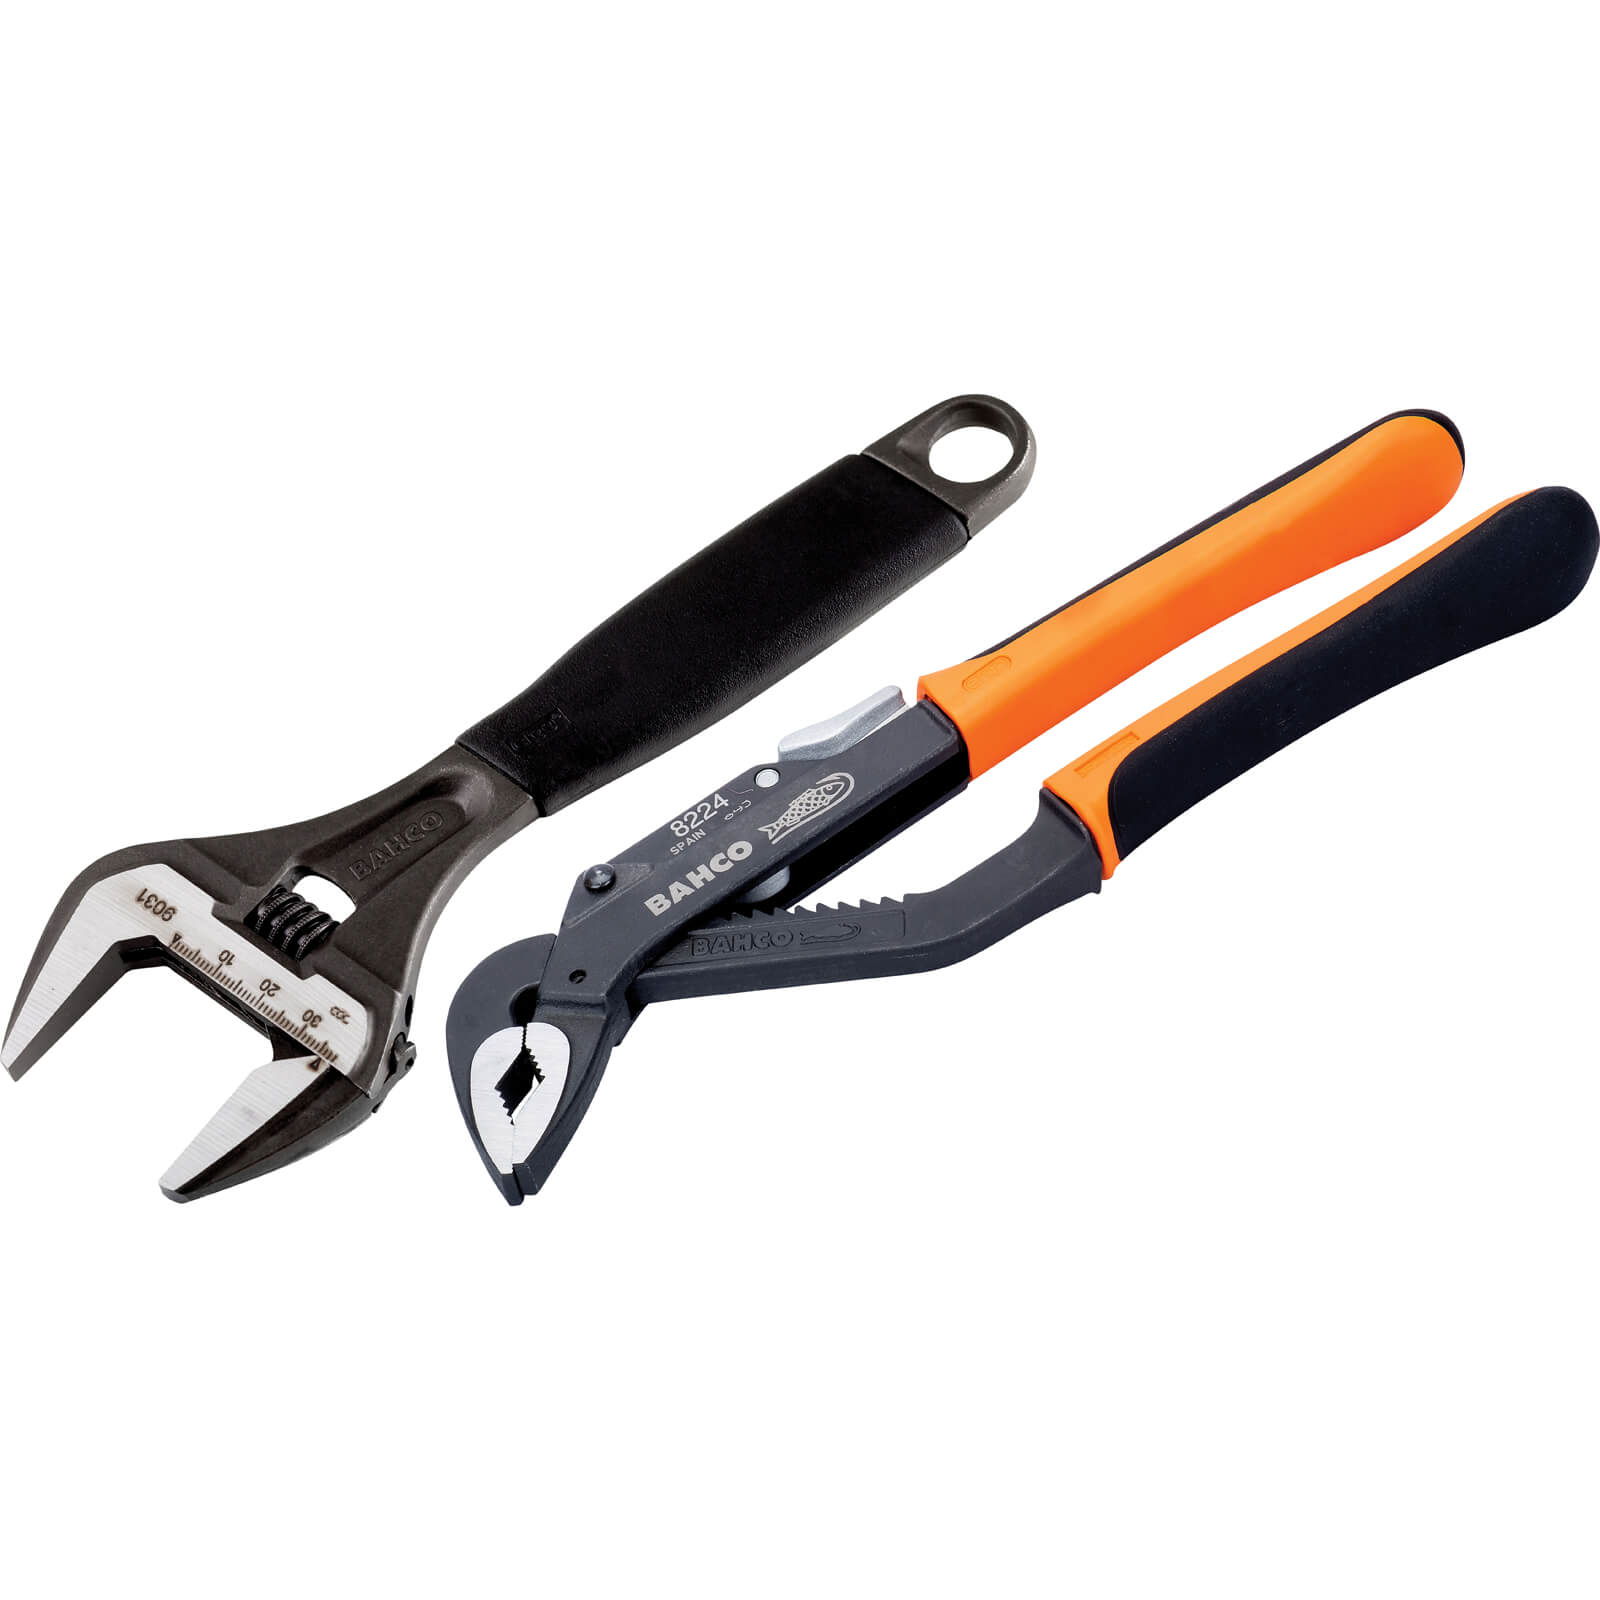 Image of Bahco 2 Piece Water Pump Pliers and Adjustable Wrench Set